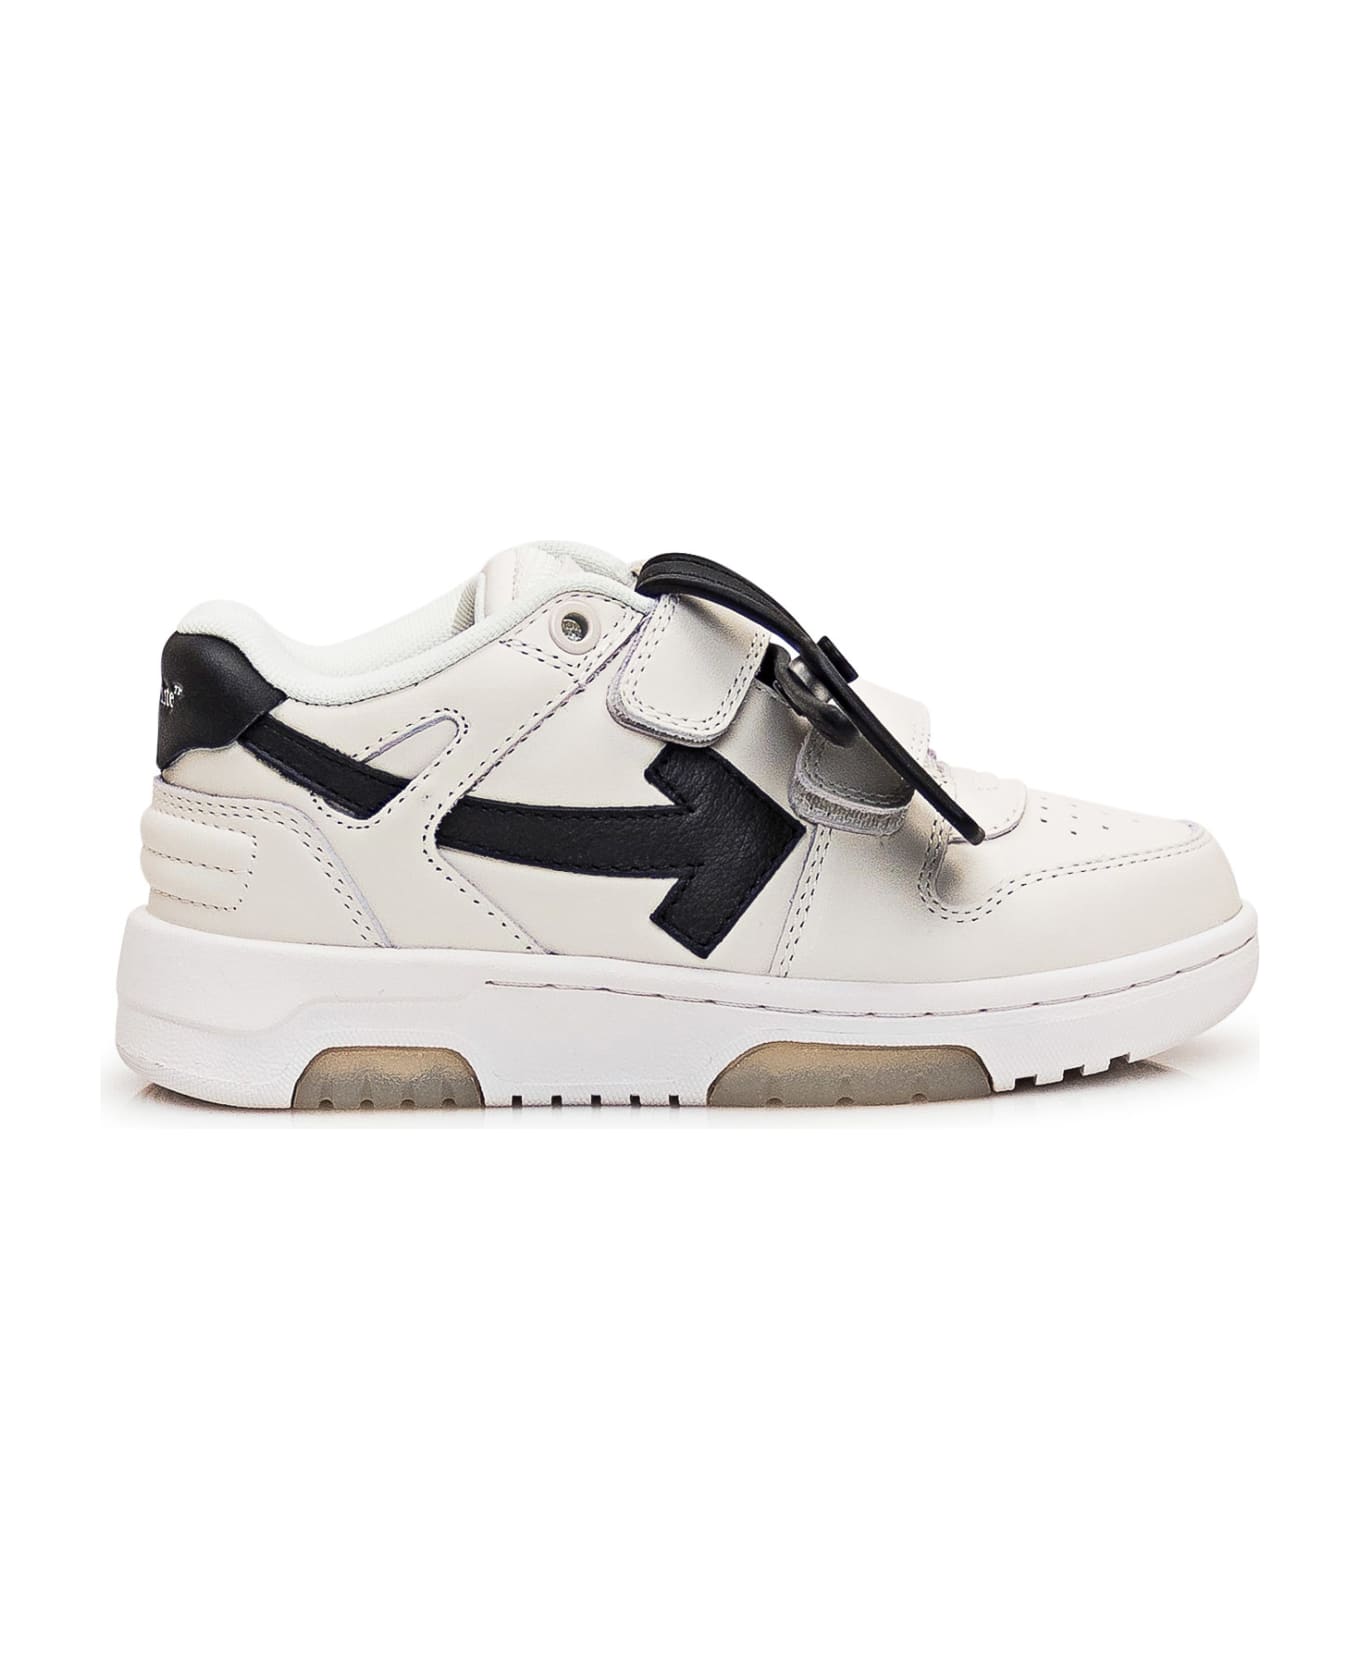 Off-White Out Of Office Sneaker - OFF WHITE BLACK